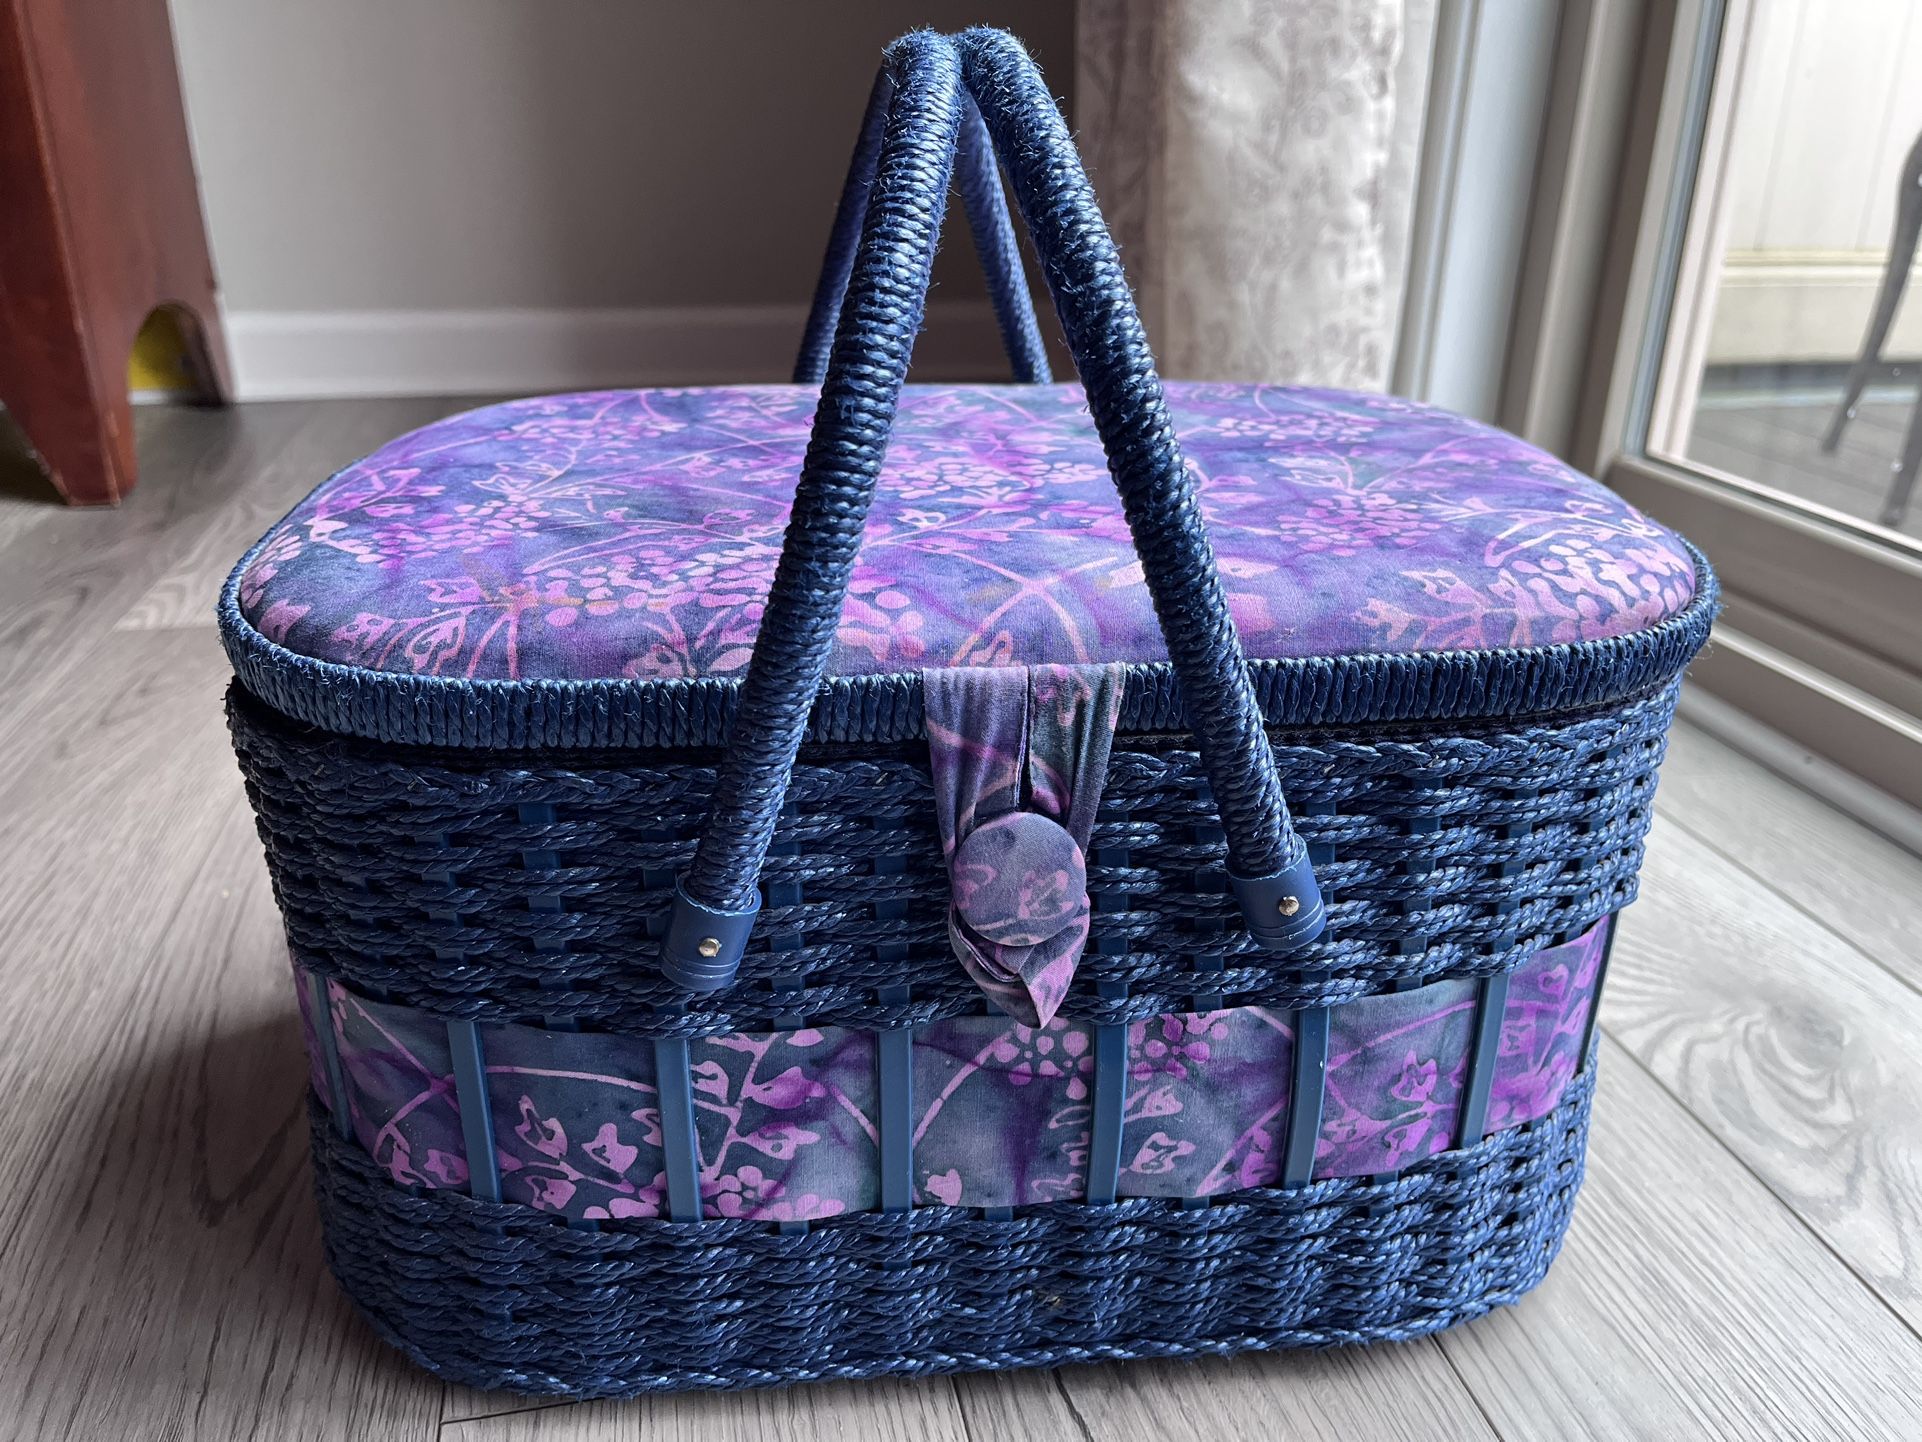 Wicker Sewing Basket With Sewing Supplies